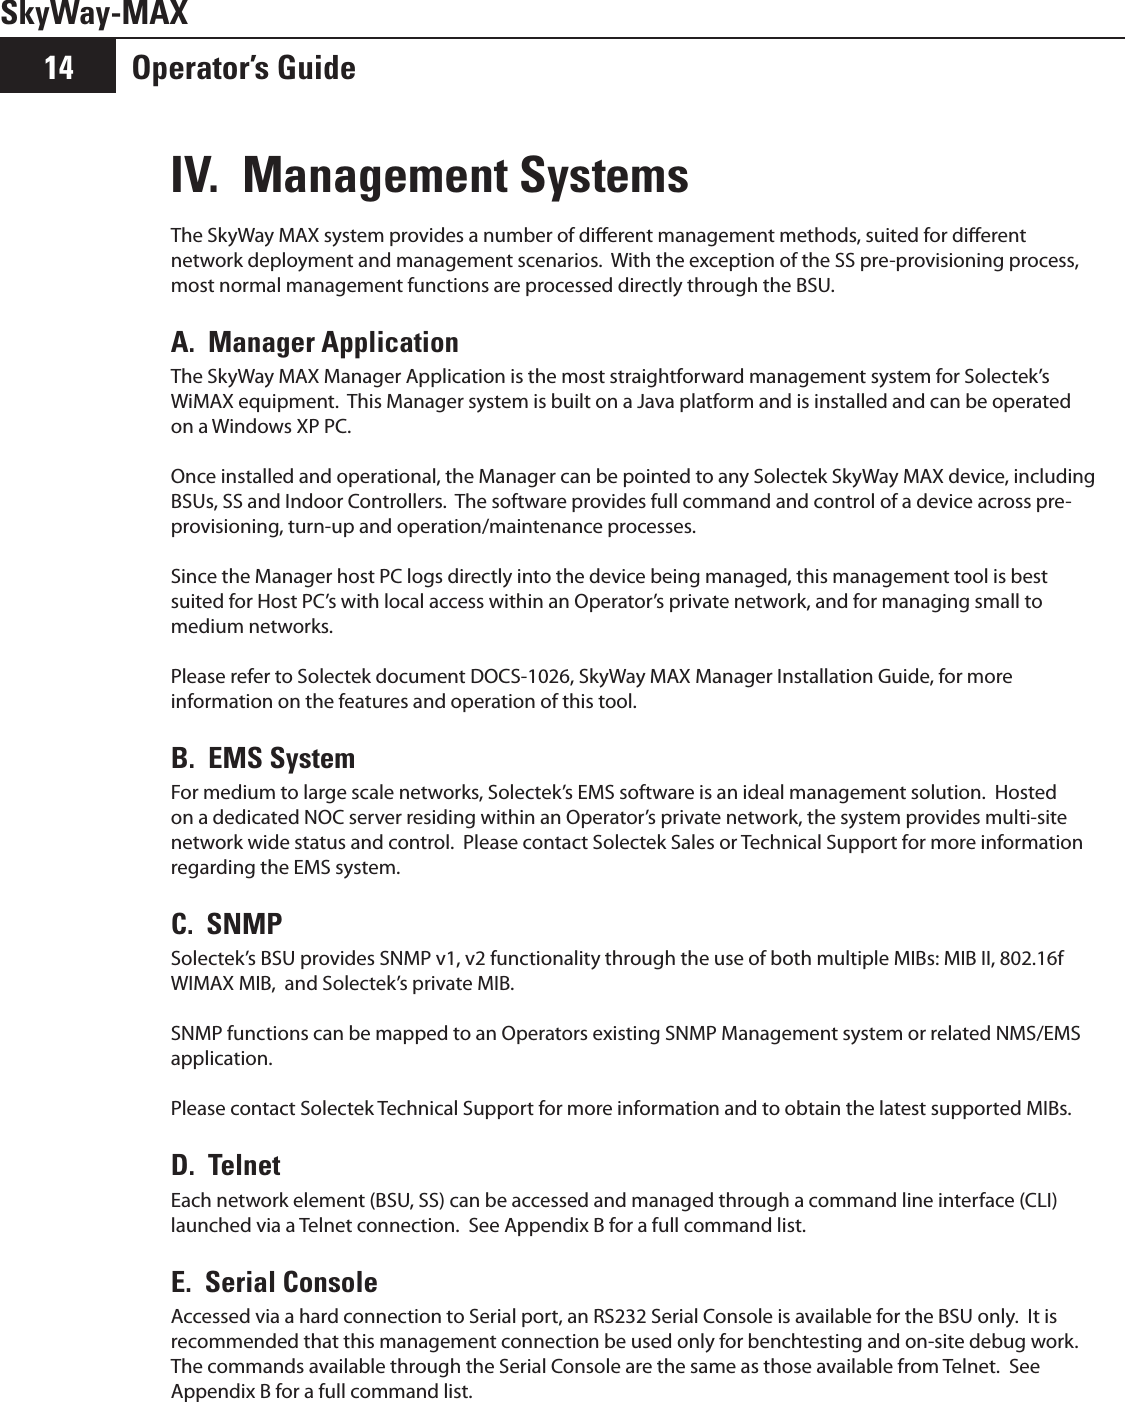 Operator’s Guide14SkyWay-MAXIV.  Management SystemsThe SkyWay MAX system provides a number of dierent management methods, suited for dierent network deployment and management scenarios.  With the exception of the SS pre-provisioning process, most normal management functions are processed directly through the BSU.A.  Manager ApplicationThe SkyWay MAX Manager Application is the most straightforward management system for Solectek’s WiMAX equipment.  This Manager system is built on a Java platform and is installed and can be operated  on a Windows XP PC.  Once installed and operational, the Manager can be pointed to any Solectek SkyWay MAX device, including BSUs, SS and Indoor Controllers.  The software provides full command and control of a device across pre-provisioning, turn-up and operation/maintenance processes.Since the Manager host PC logs directly into the device being managed, this management tool is best suited for Host PC’s with local access within an Operator’s private network, and for managing small to medium networks.Please refer to Solectek document DOCS-1026, SkyWay MAX Manager Installation Guide, for more information on the features and operation of this tool.B.  EMS SystemFor medium to large scale networks, Solectek’s EMS software is an ideal management solution.  Hosted on a dedicated NOC server residing within an Operator’s private network, the system provides multi-site network wide status and control.  Please contact Solectek Sales or Technical Support for more information regarding the EMS system.C.  SNMPSolectek’s BSU provides SNMP v1, v2 functionality through the use of both multiple MIBs: MIB II, 802.16f WIMAX MIB,  and Solectek’s private MIB.SNMP functions can be mapped to an Operators existing SNMP Management system or related NMS/EMS application.  Please contact Solectek Technical Support for more information and to obtain the latest supported MIBs.D.  TelnetEach network element (BSU, SS) can be accessed and managed through a command line interface (CLI) launched via a Telnet connection.  See Appendix B for a full command list.E.  Serial ConsoleAccessed via a hard connection to Serial port, an RS232 Serial Console is available for the BSU only.  It is recommended that this management connection be used only for benchtesting and on-site debug work.  The commands available through the Serial Console are the same as those available from Telnet.  See Appendix B for a full command list.